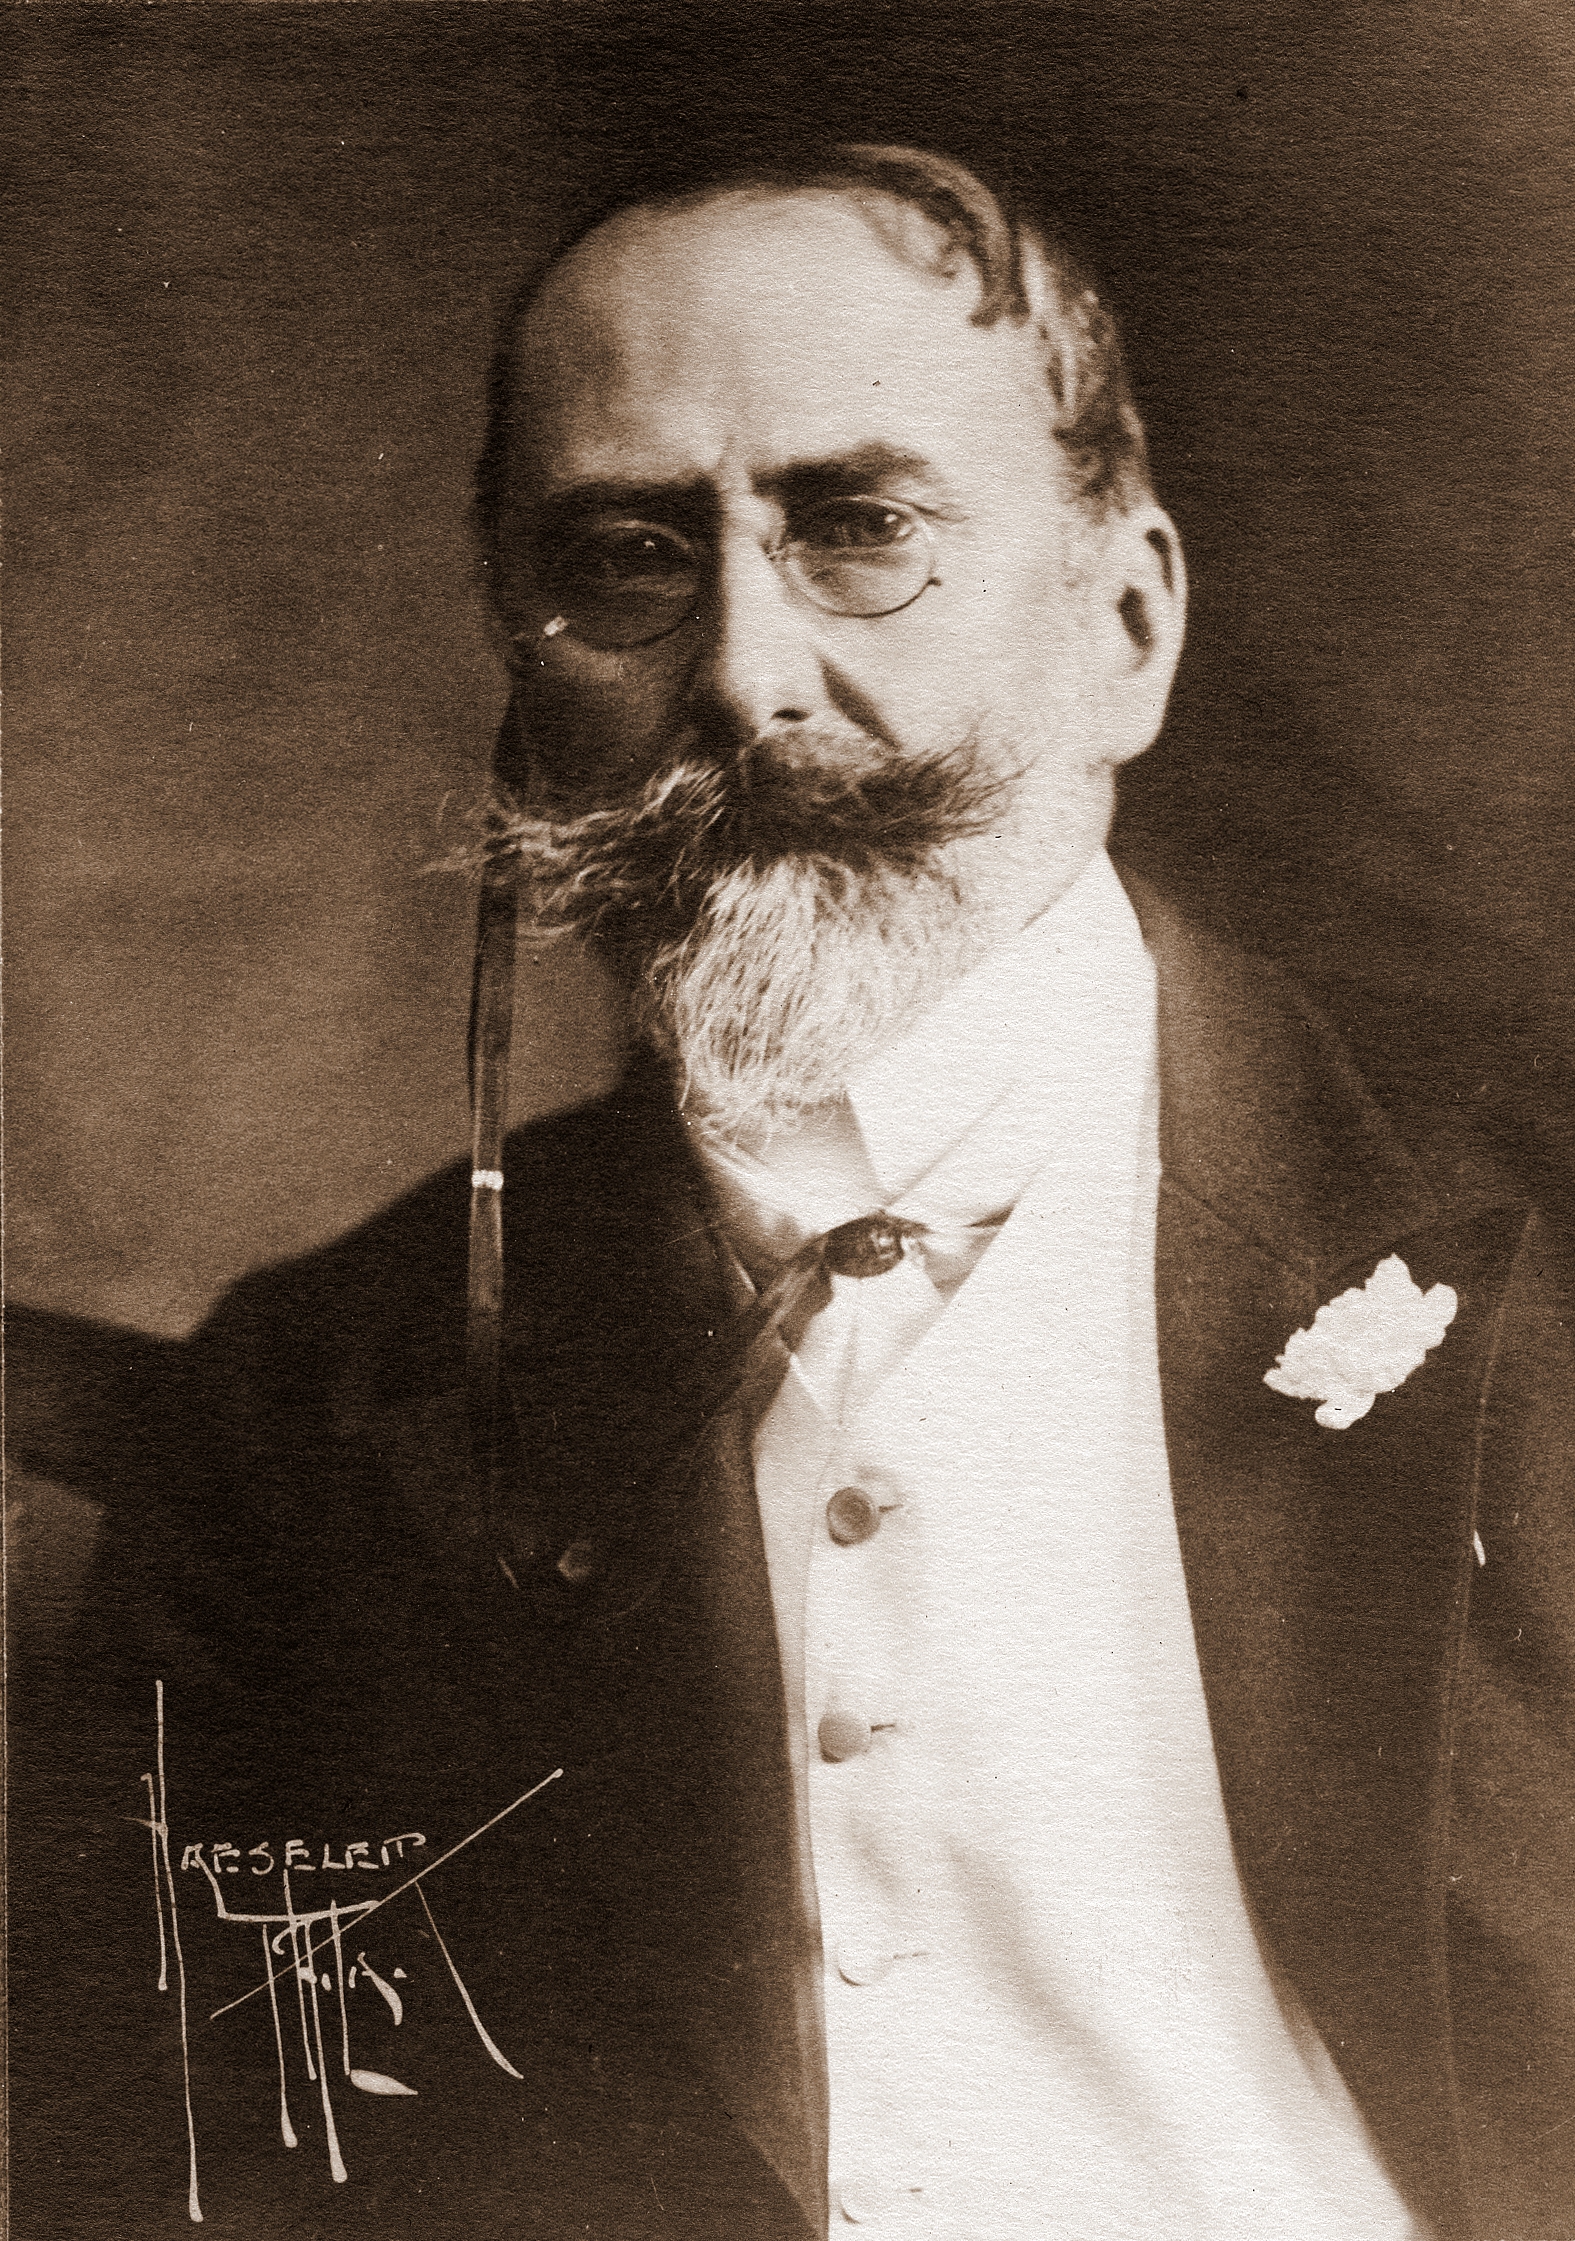 Old photograph of William Merritt Chase. Man in formal wear with spectacles. Has an untrimmed moustache and a white beard.